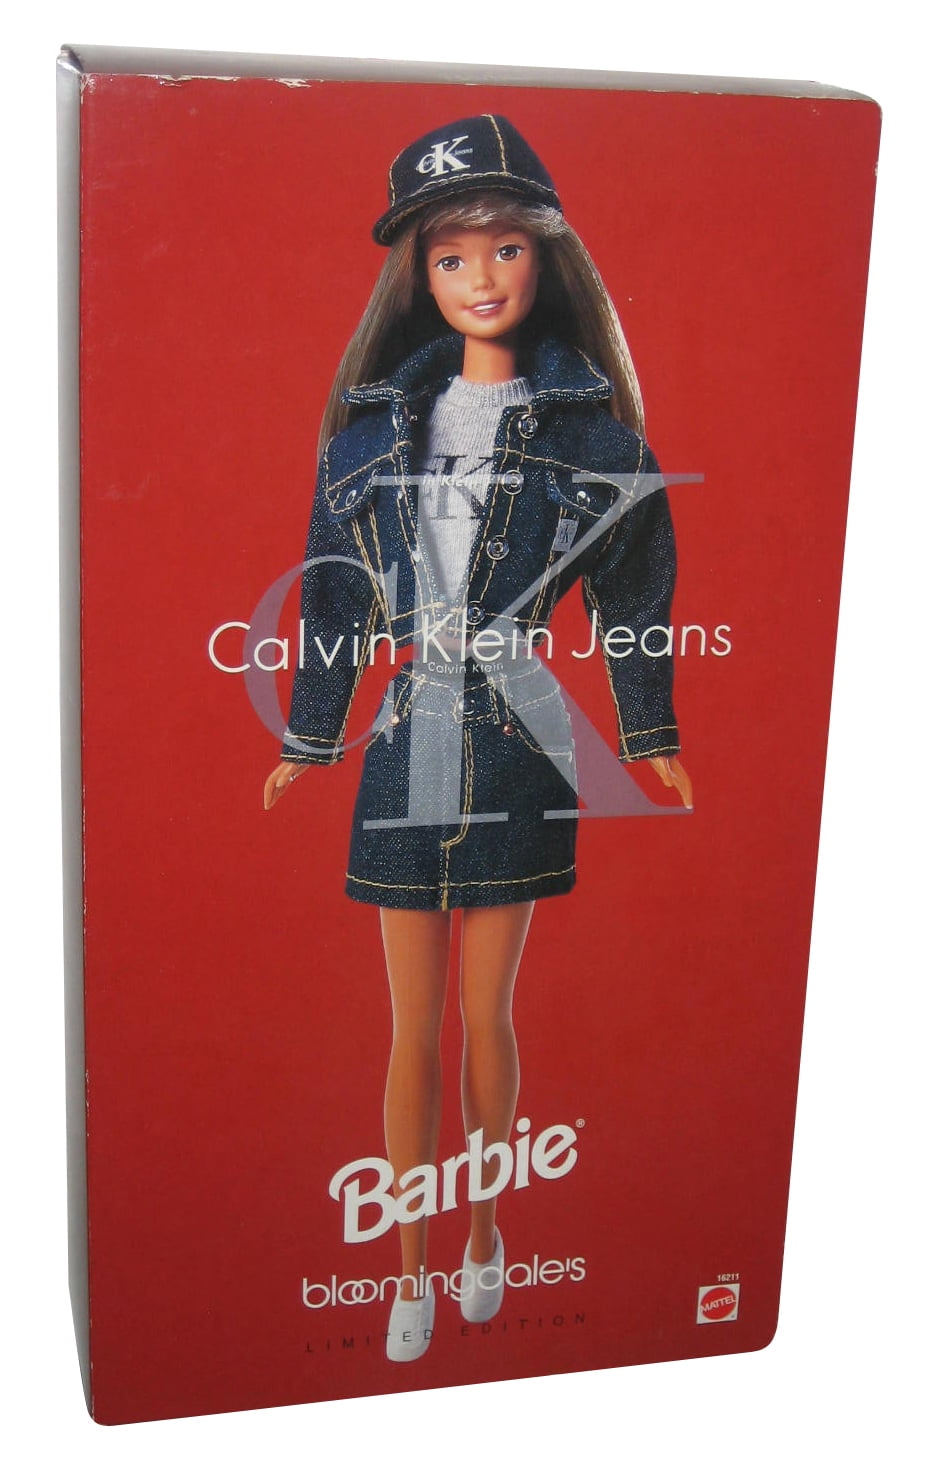 Barbie Bloomingdale's Limited Edition Calvin Klein (1996) Mattel Toy Doll -  